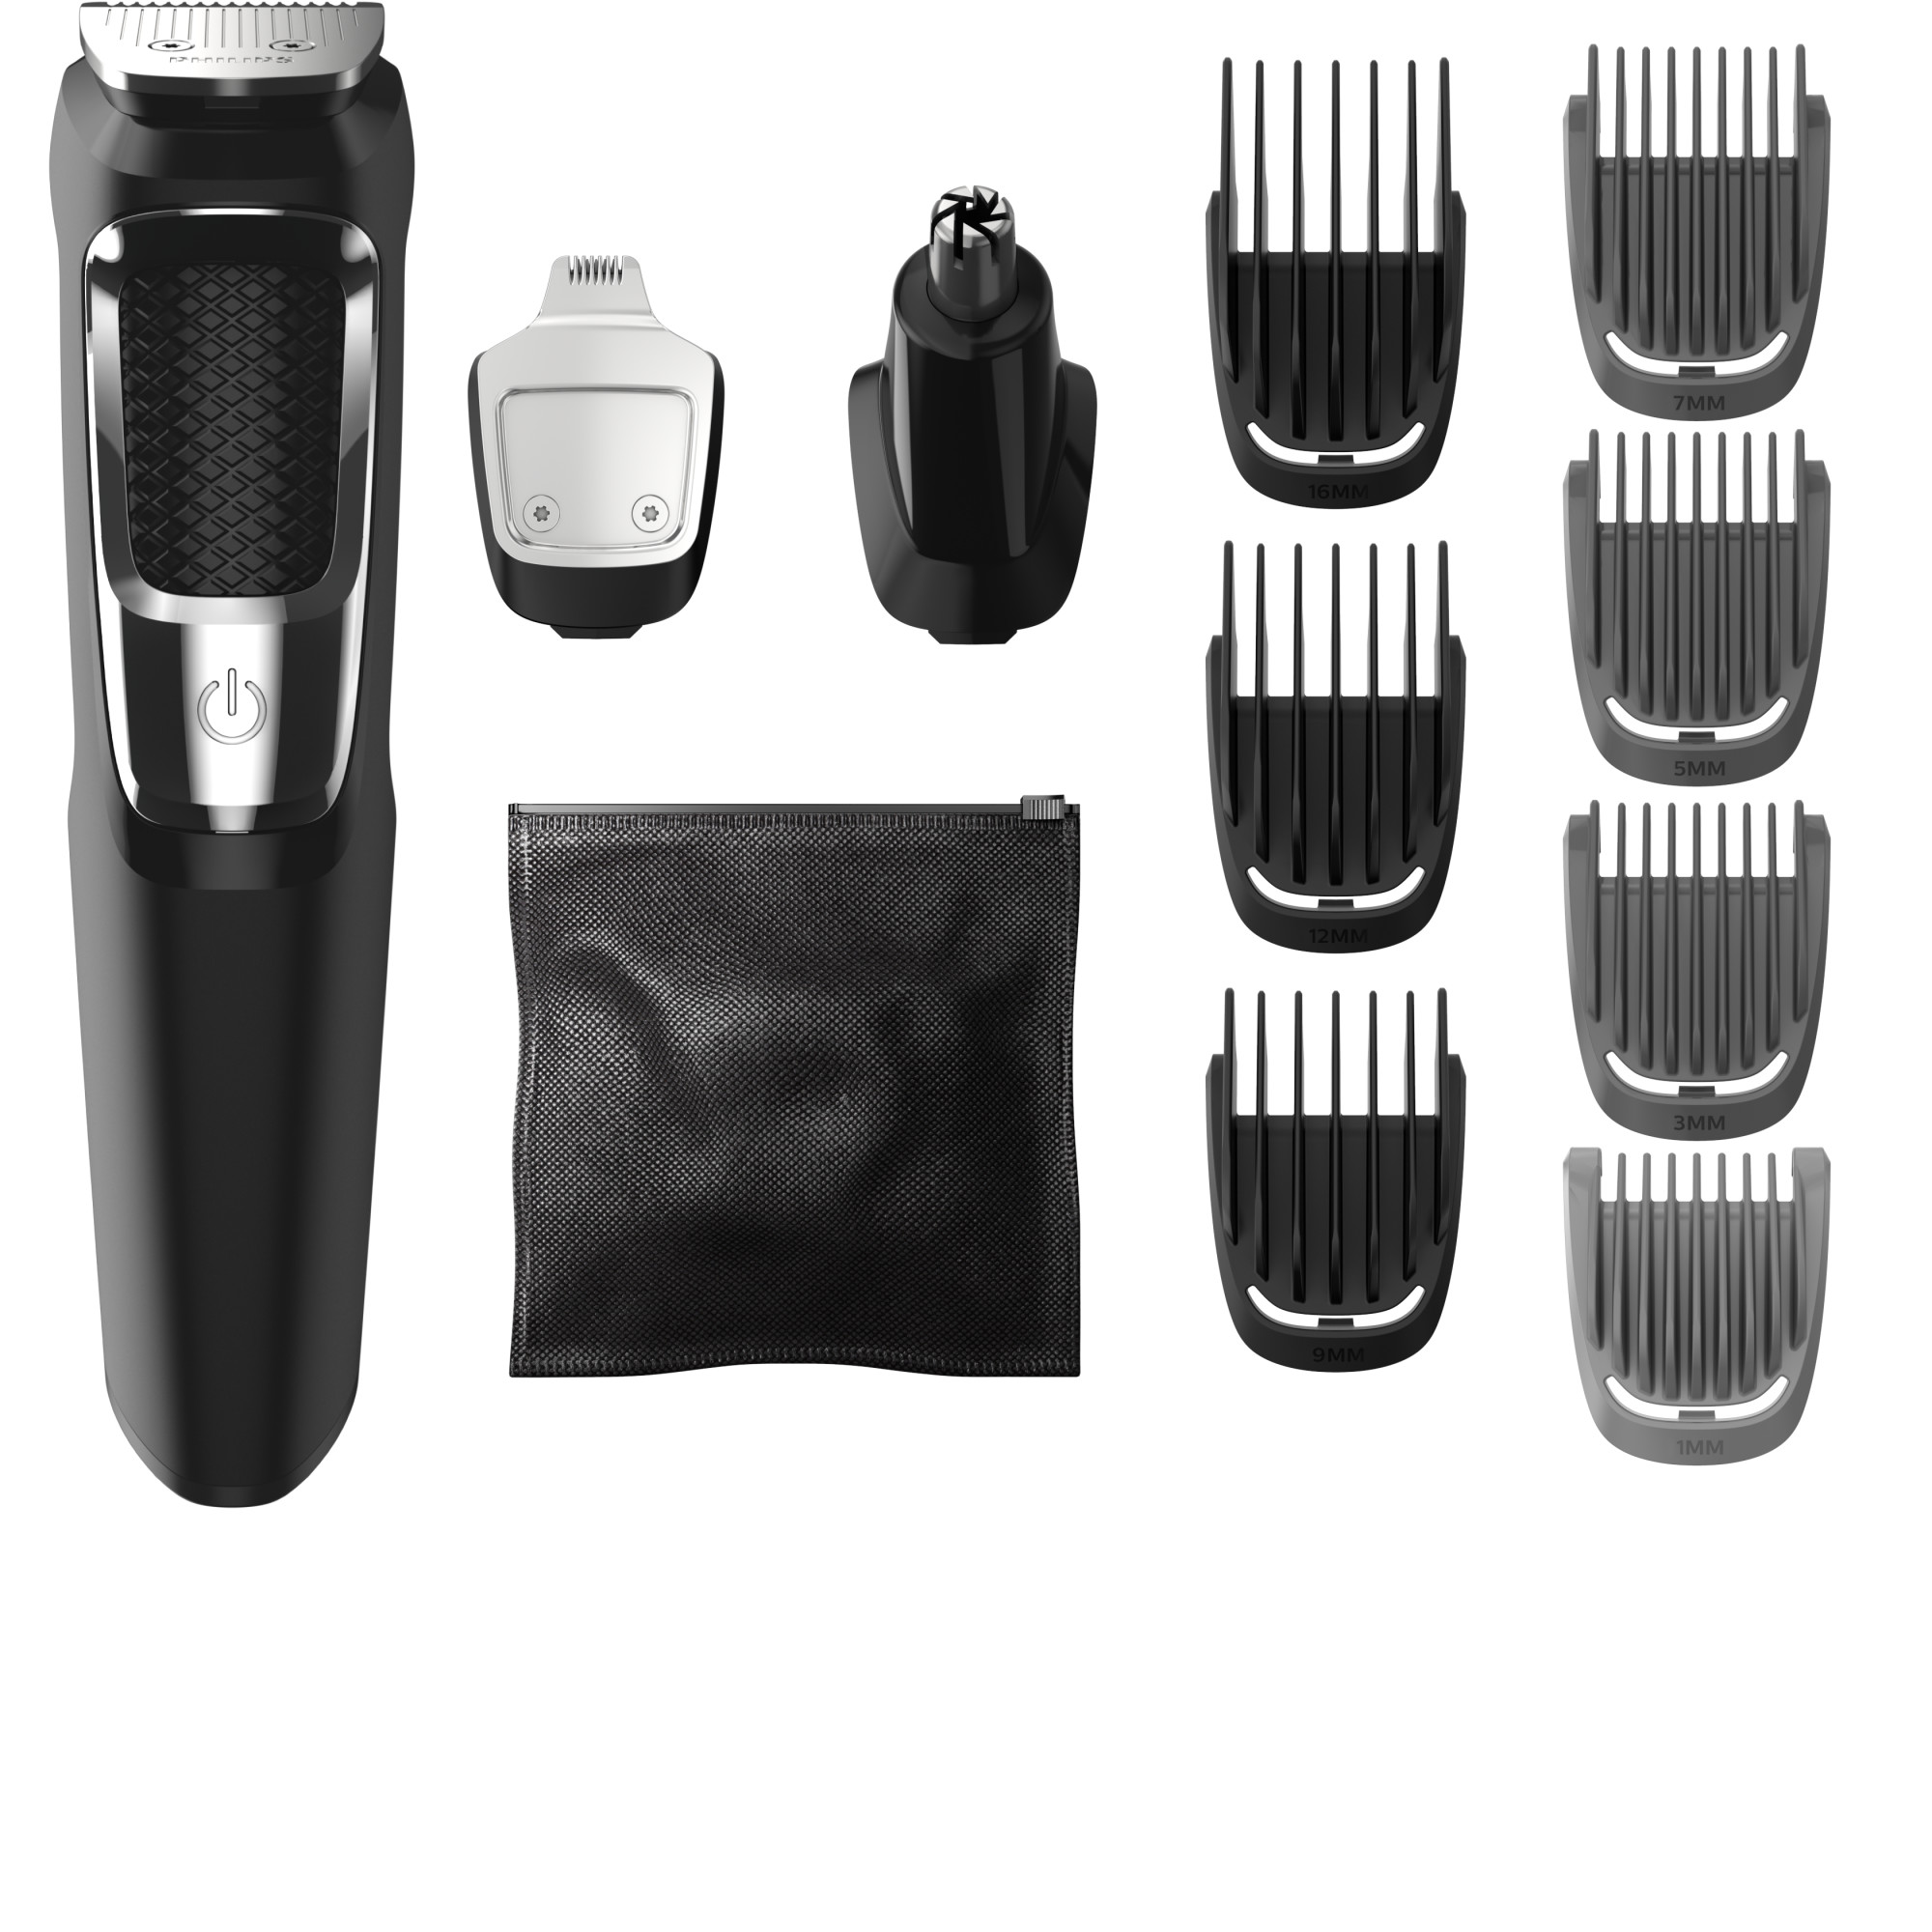 Philips Norelco Multi Groomer - 13 Piece Mens Grooming Kit For Beard, Face, Nose, and Ear Hair Trimmer and Hair Clipper - No Blade Oil Needed, MG3750/60 - image 1 of 34